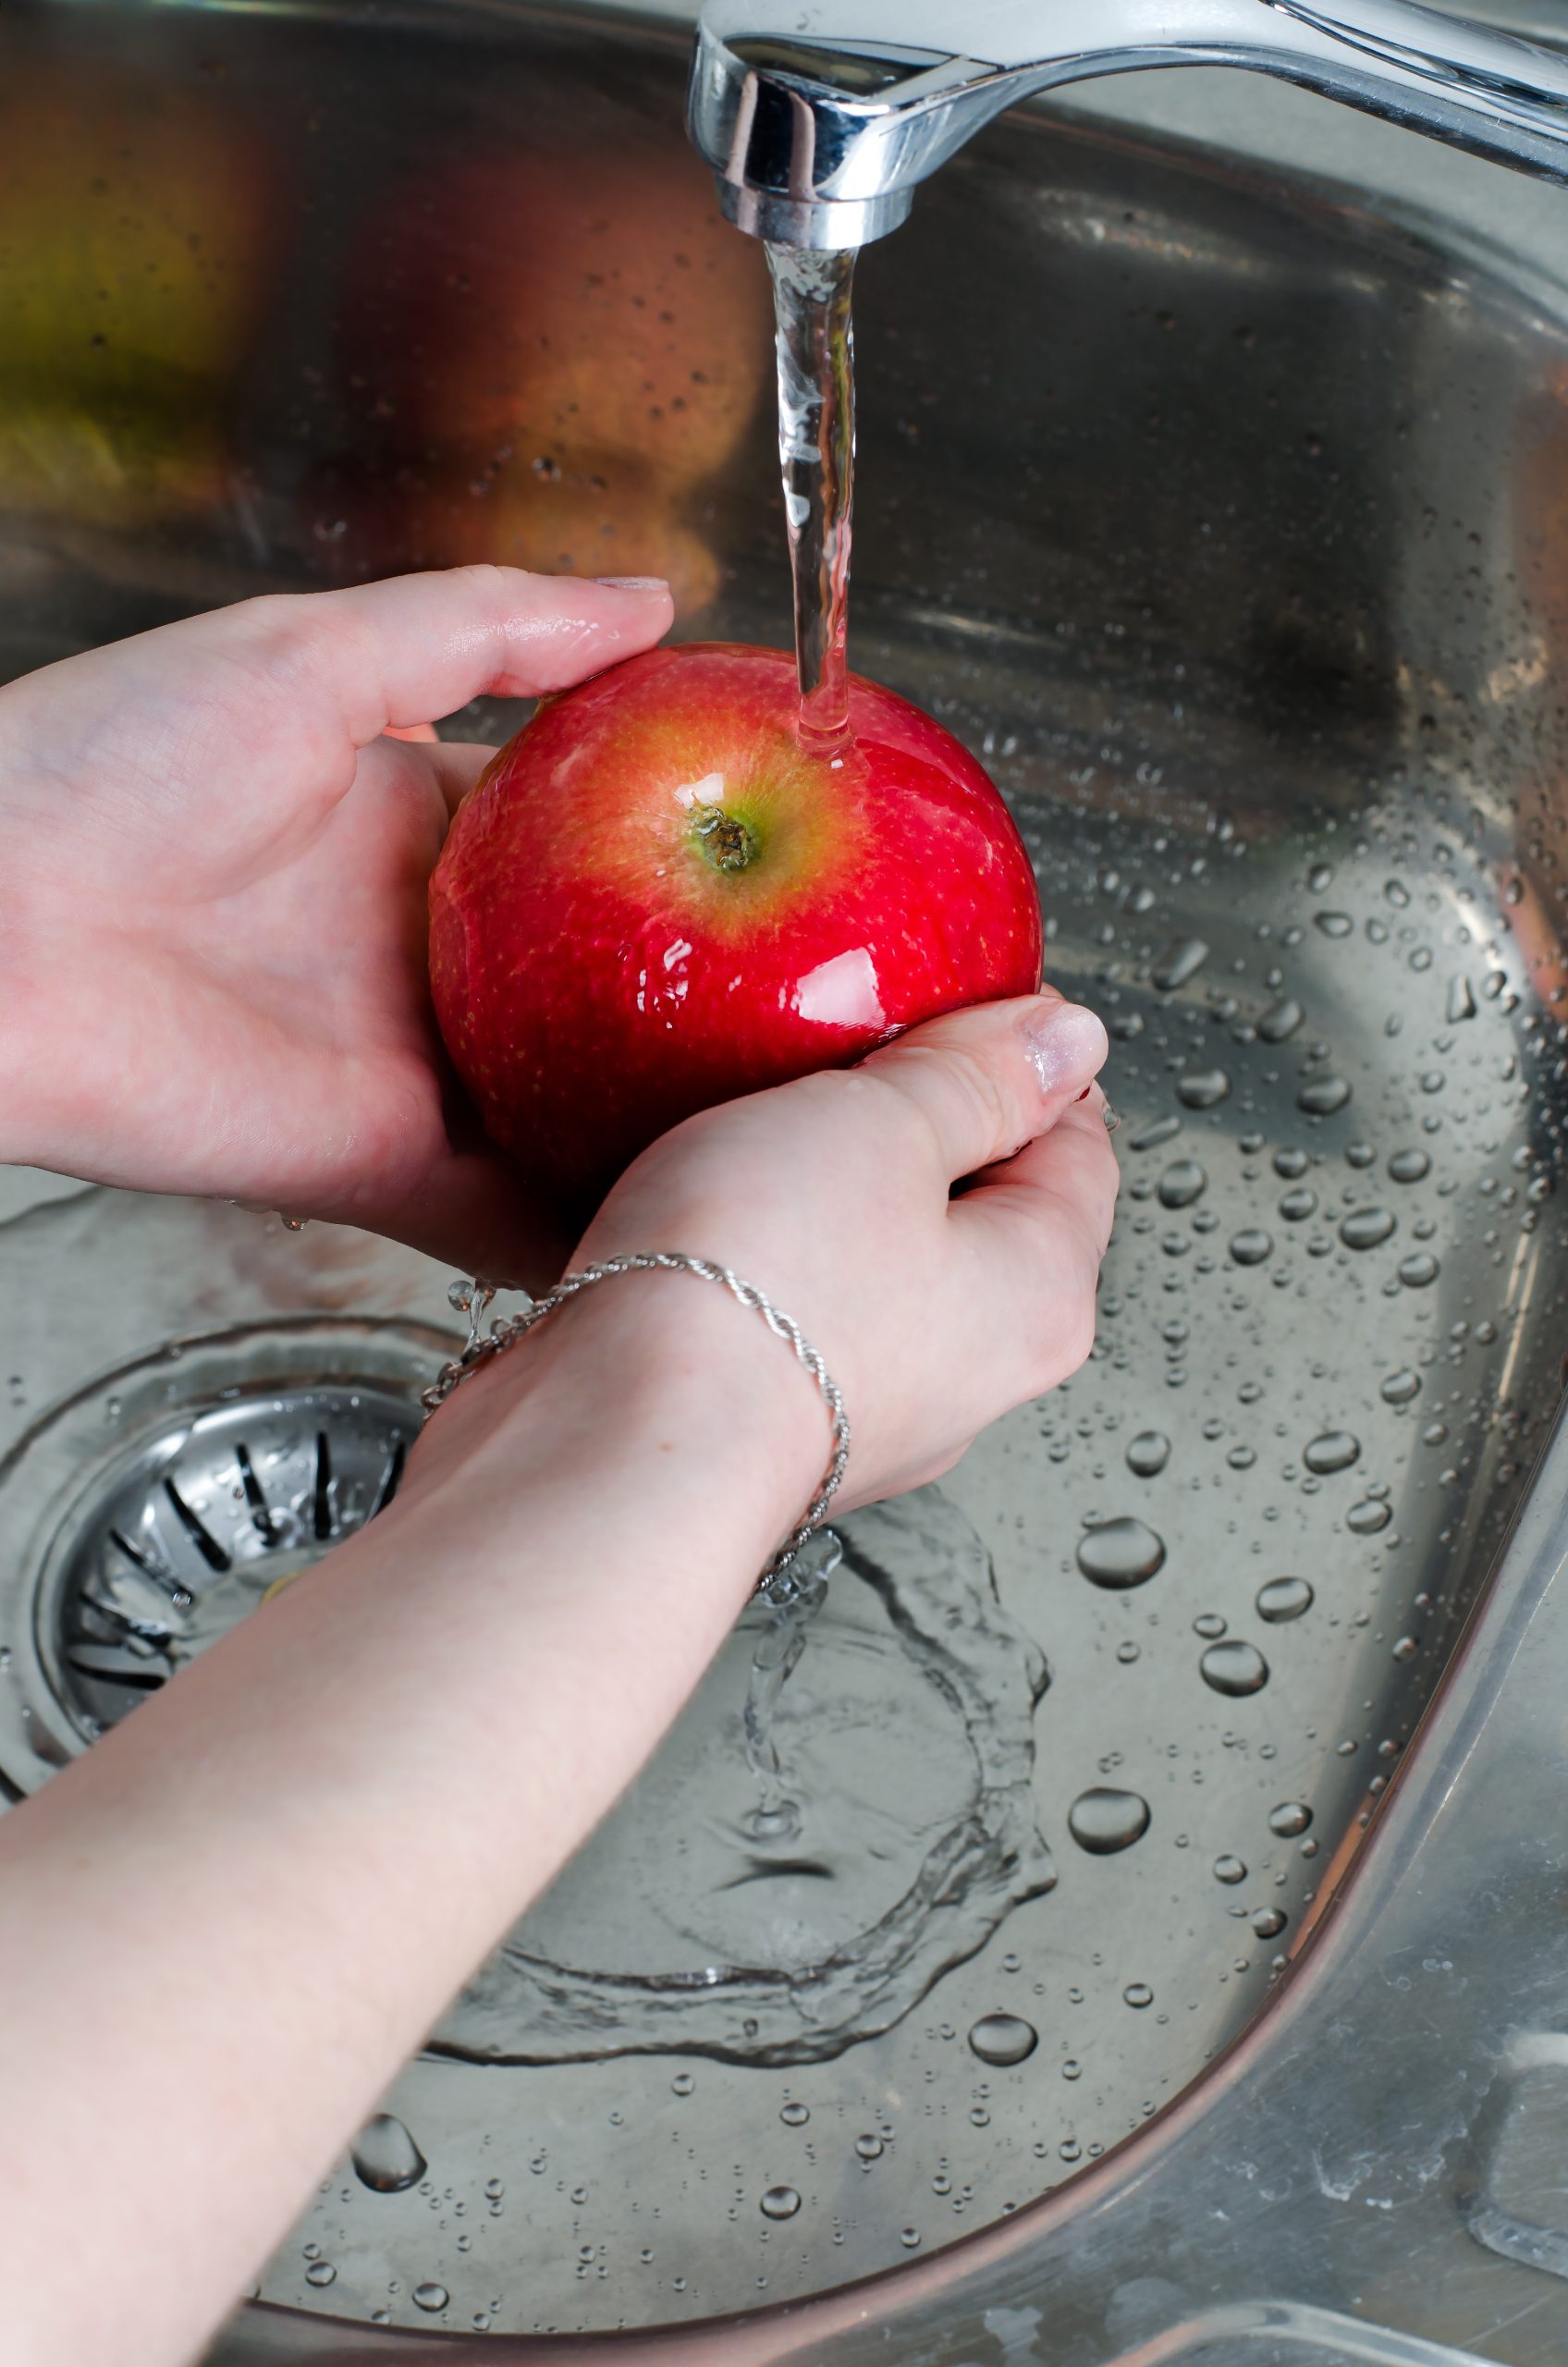 A person washing an apple in a sink.